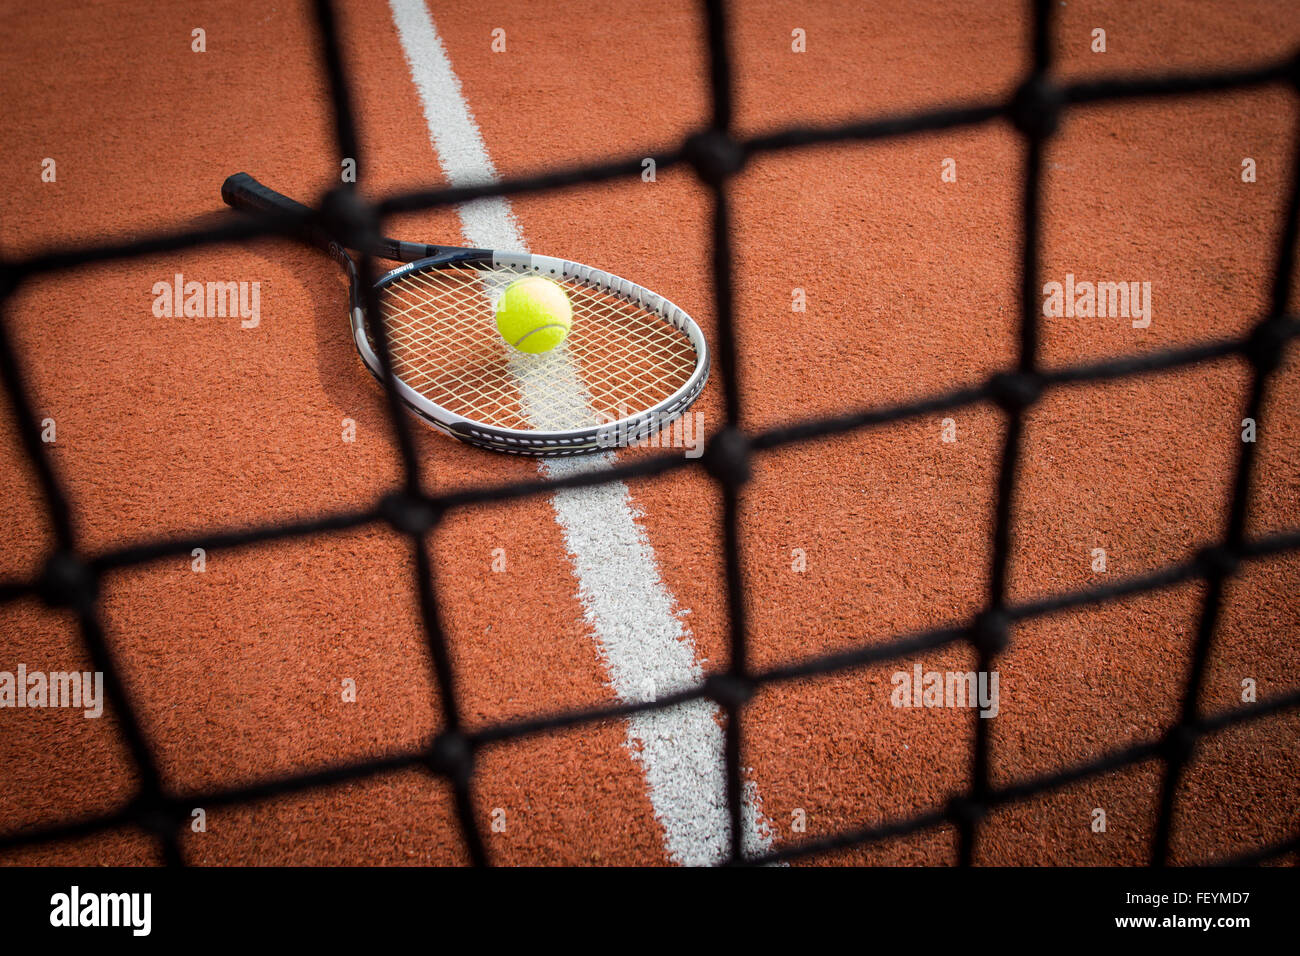 Tennis racket with a yellow ball on a brick red court through the net Stock Photo